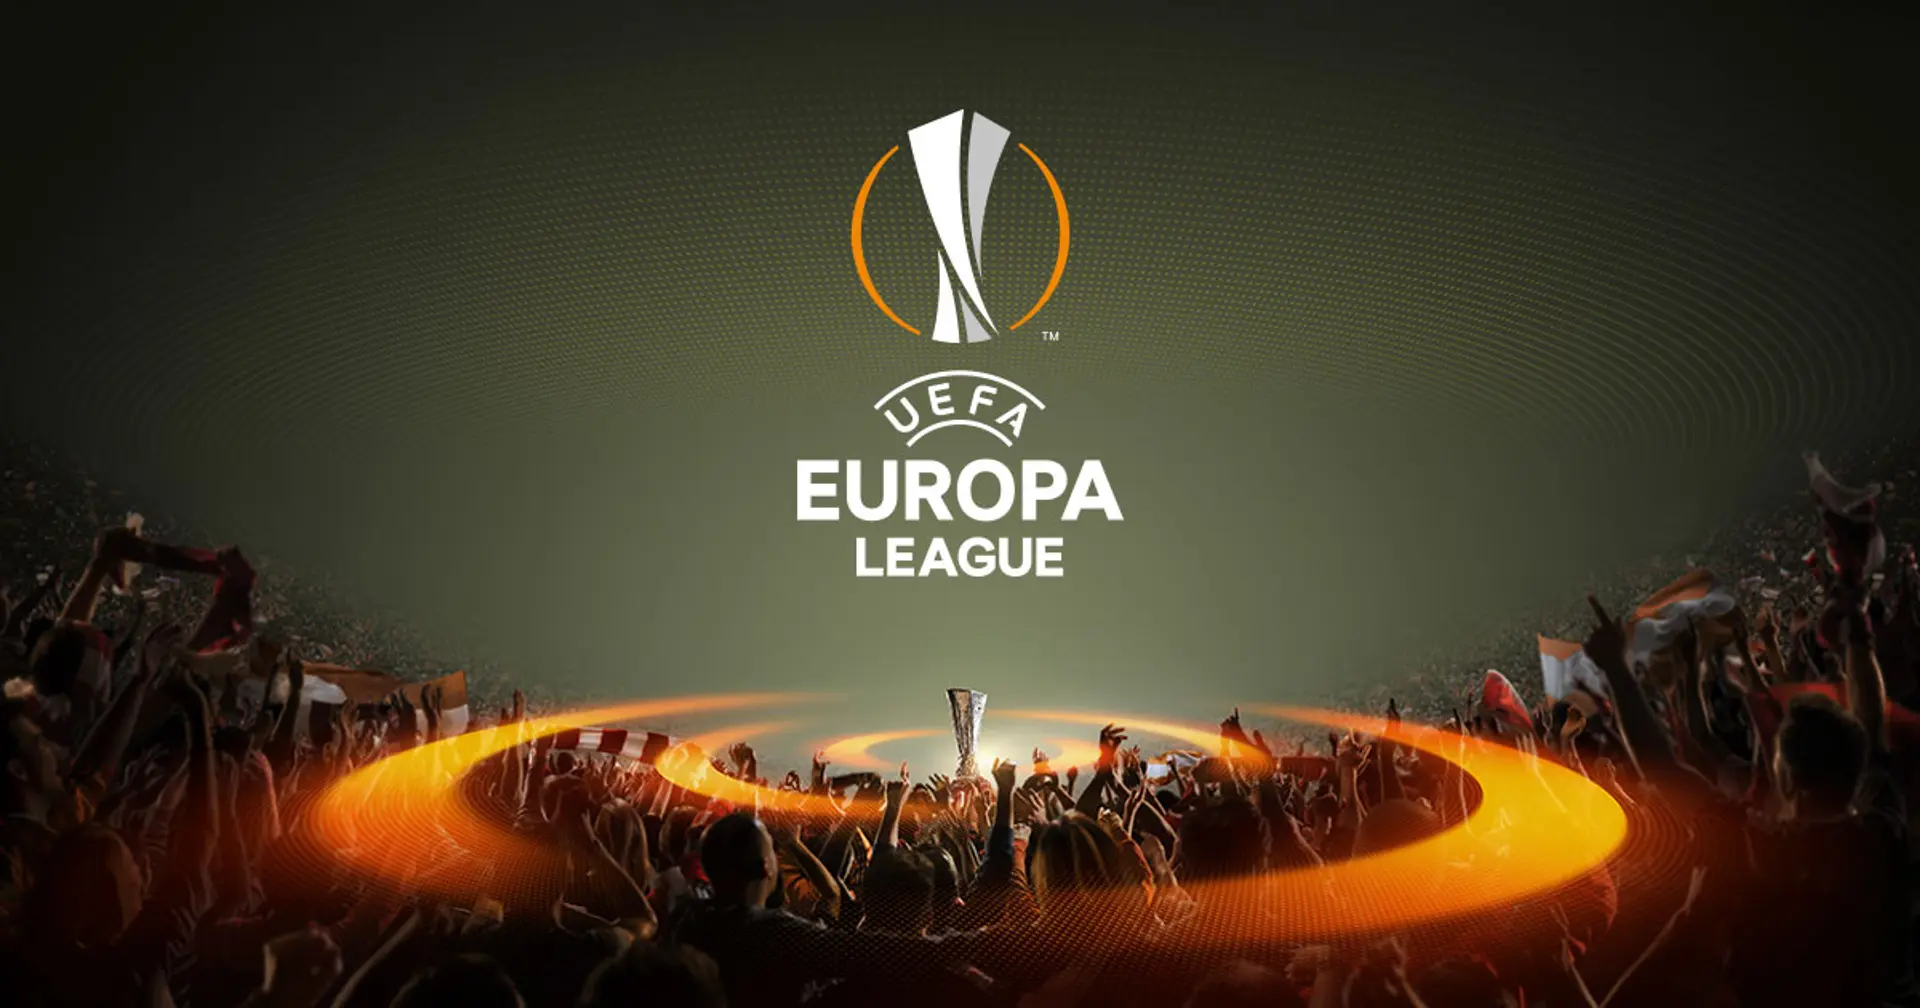 OFFICIAL: Man United to play Sevilla in Europa League semi-final